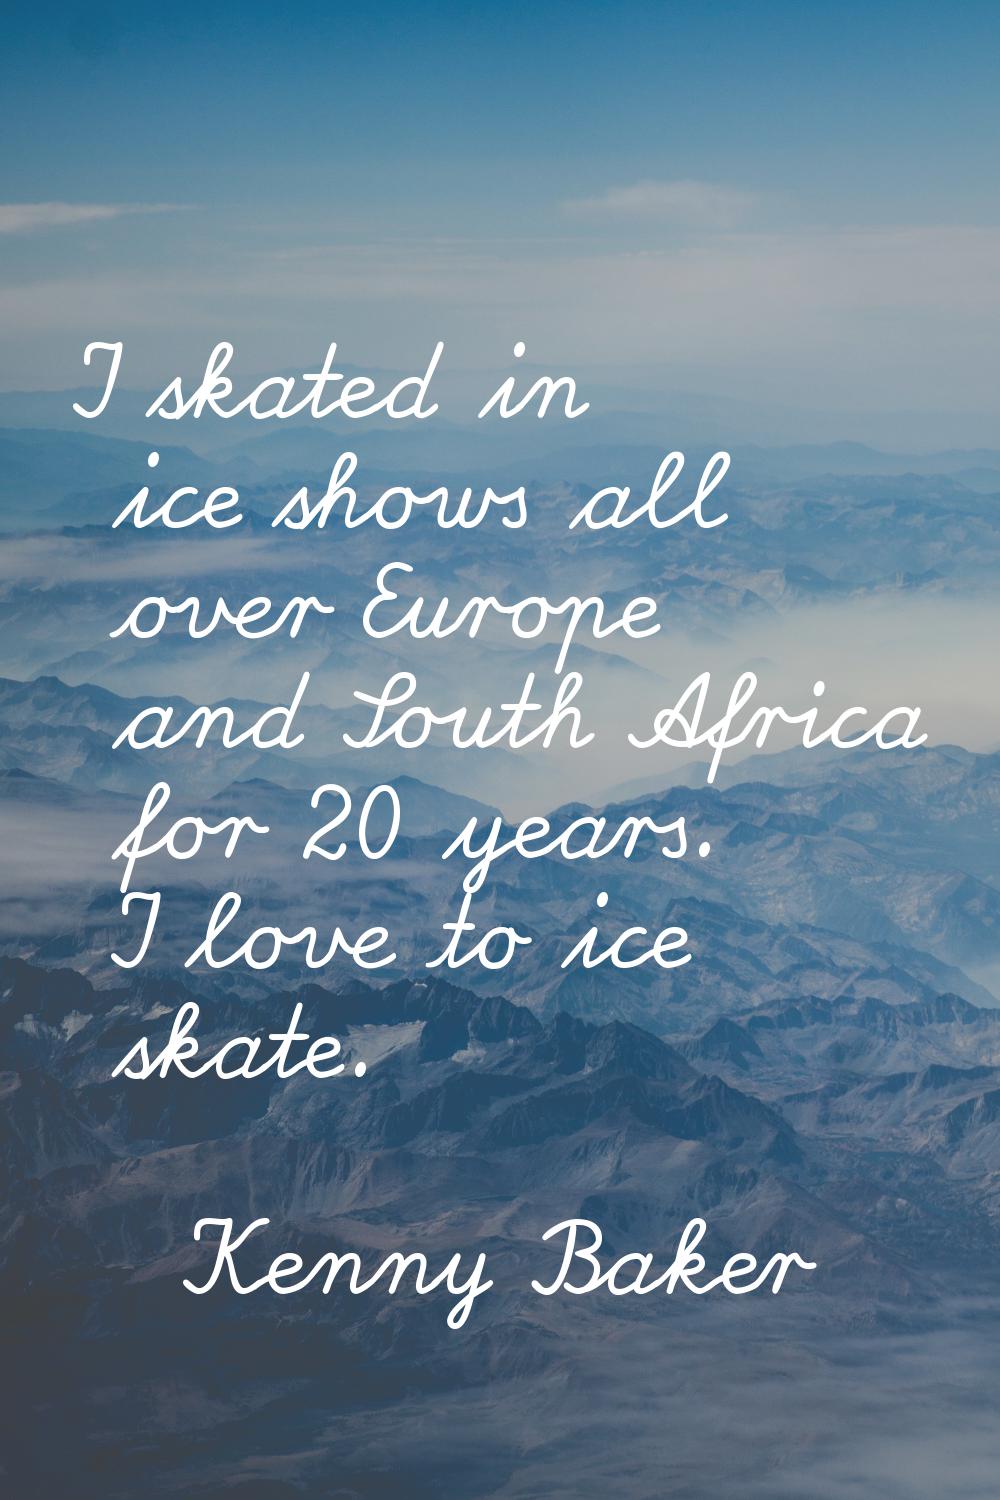 I skated in ice shows all over Europe and South Africa for 20 years. I love to ice skate.